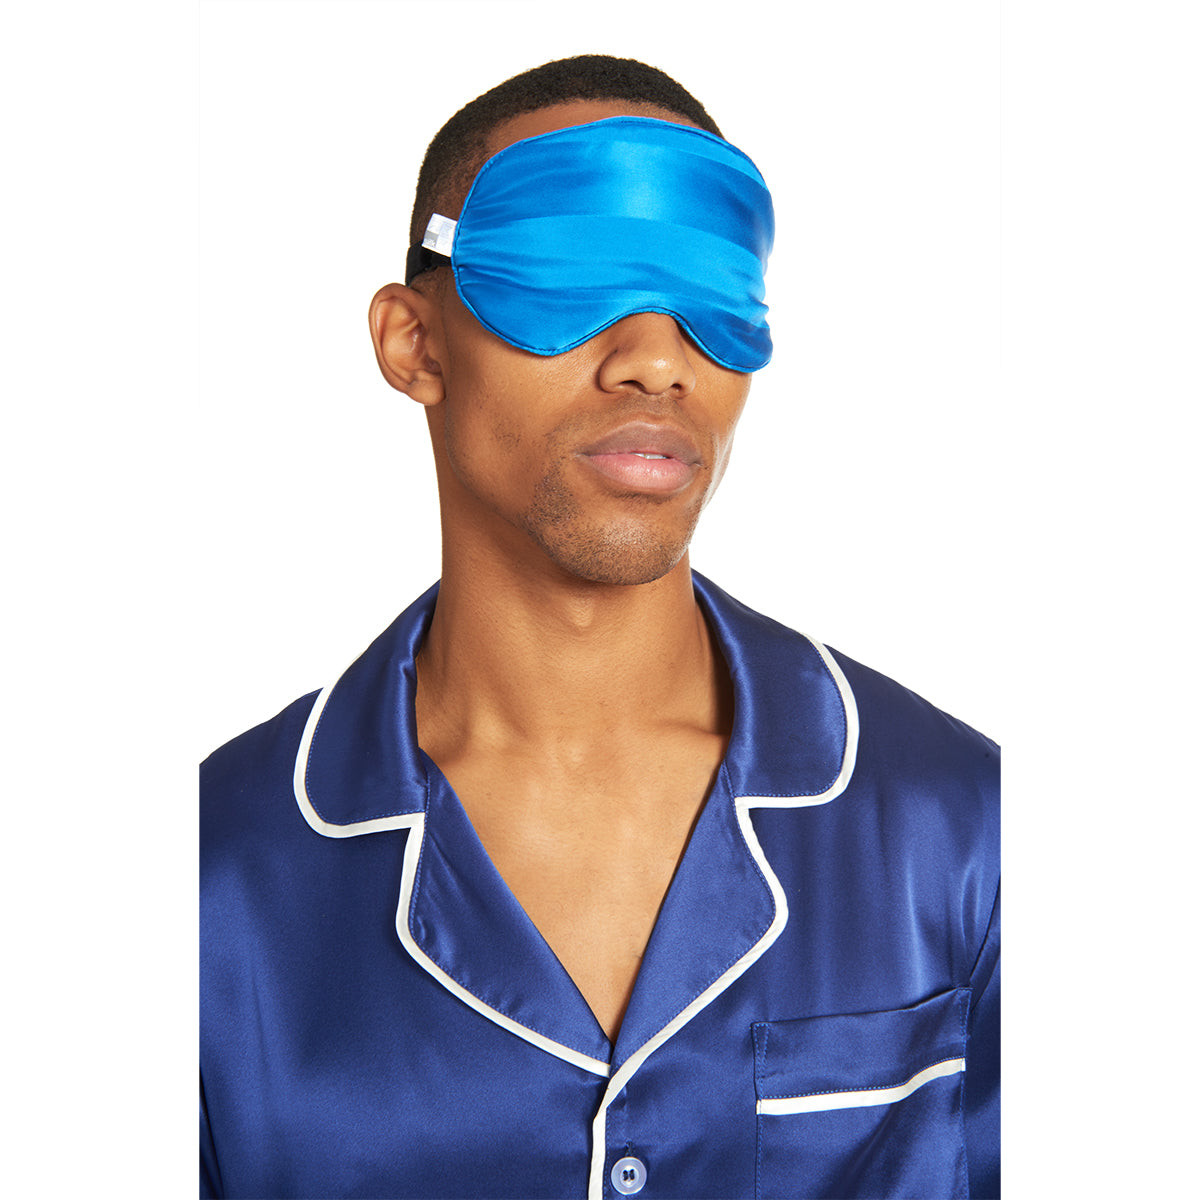 Sleep Clean with the Epic COPPER infused Silk Sleep Eye Mask by